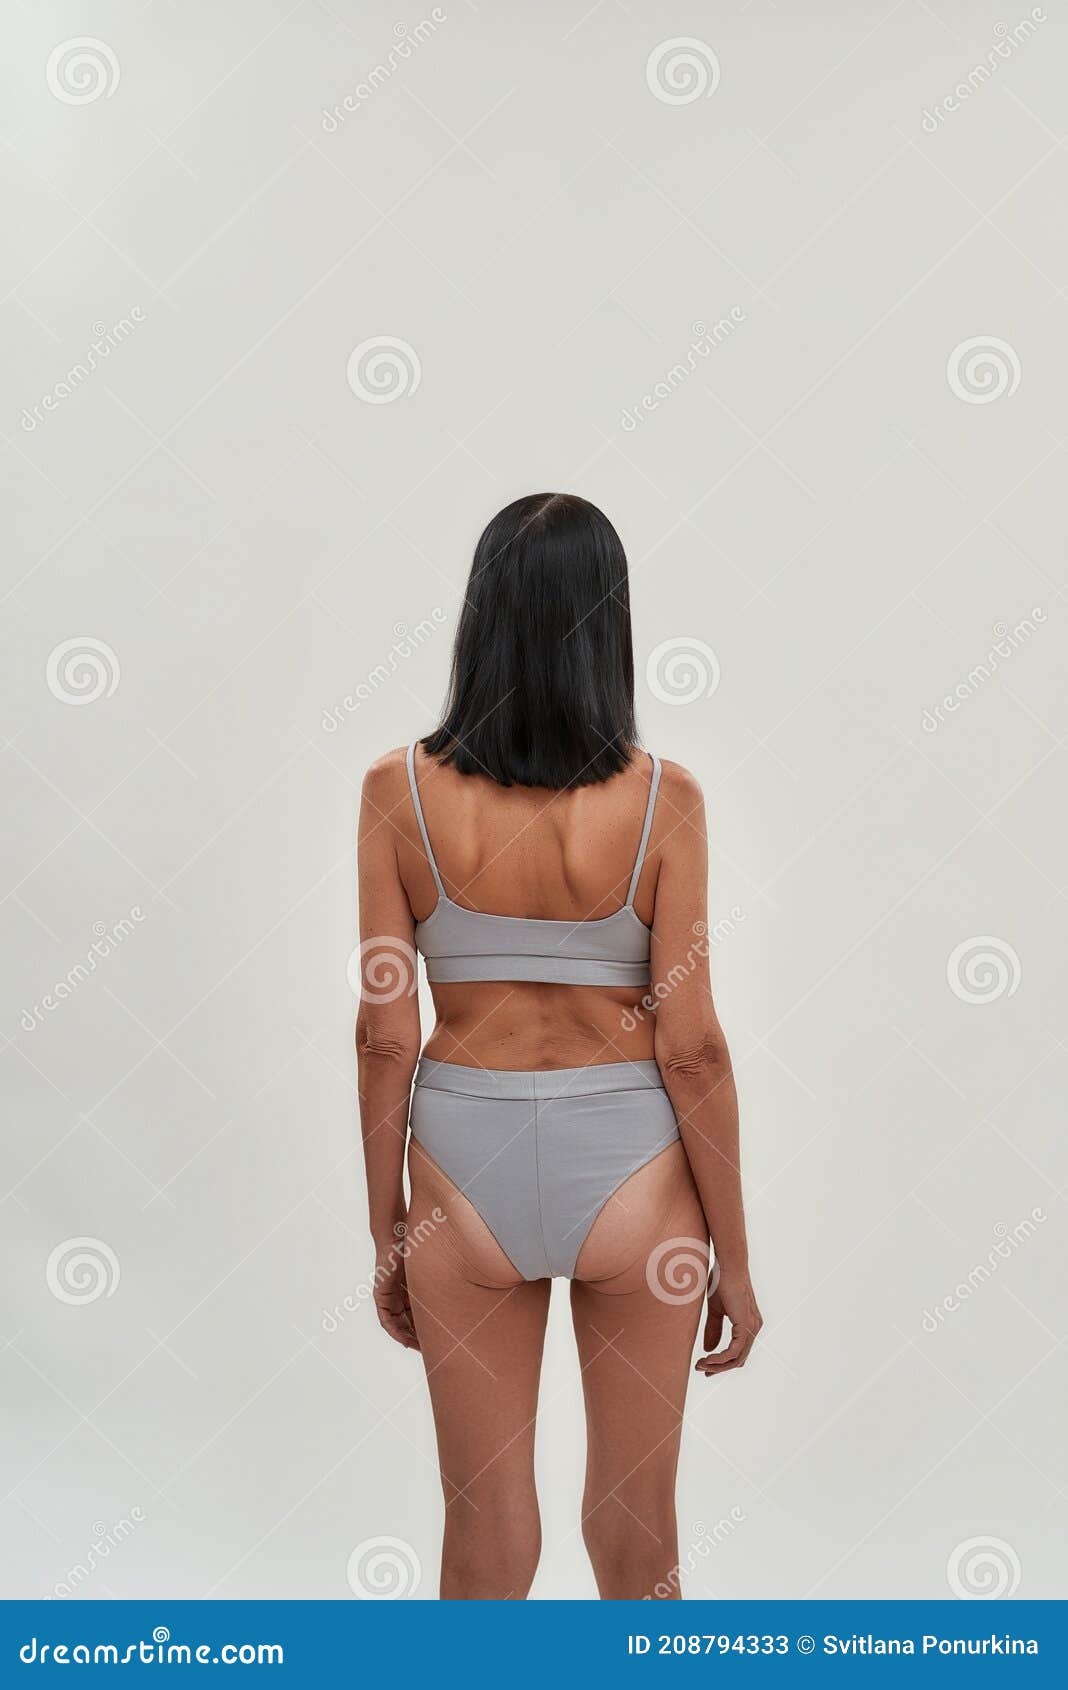 Young woman standing in top and underpants, hand pulling on underwear, rear  view - Stock Photo - Masterfile - Premium Royalty-Free, Code: 632-07161321